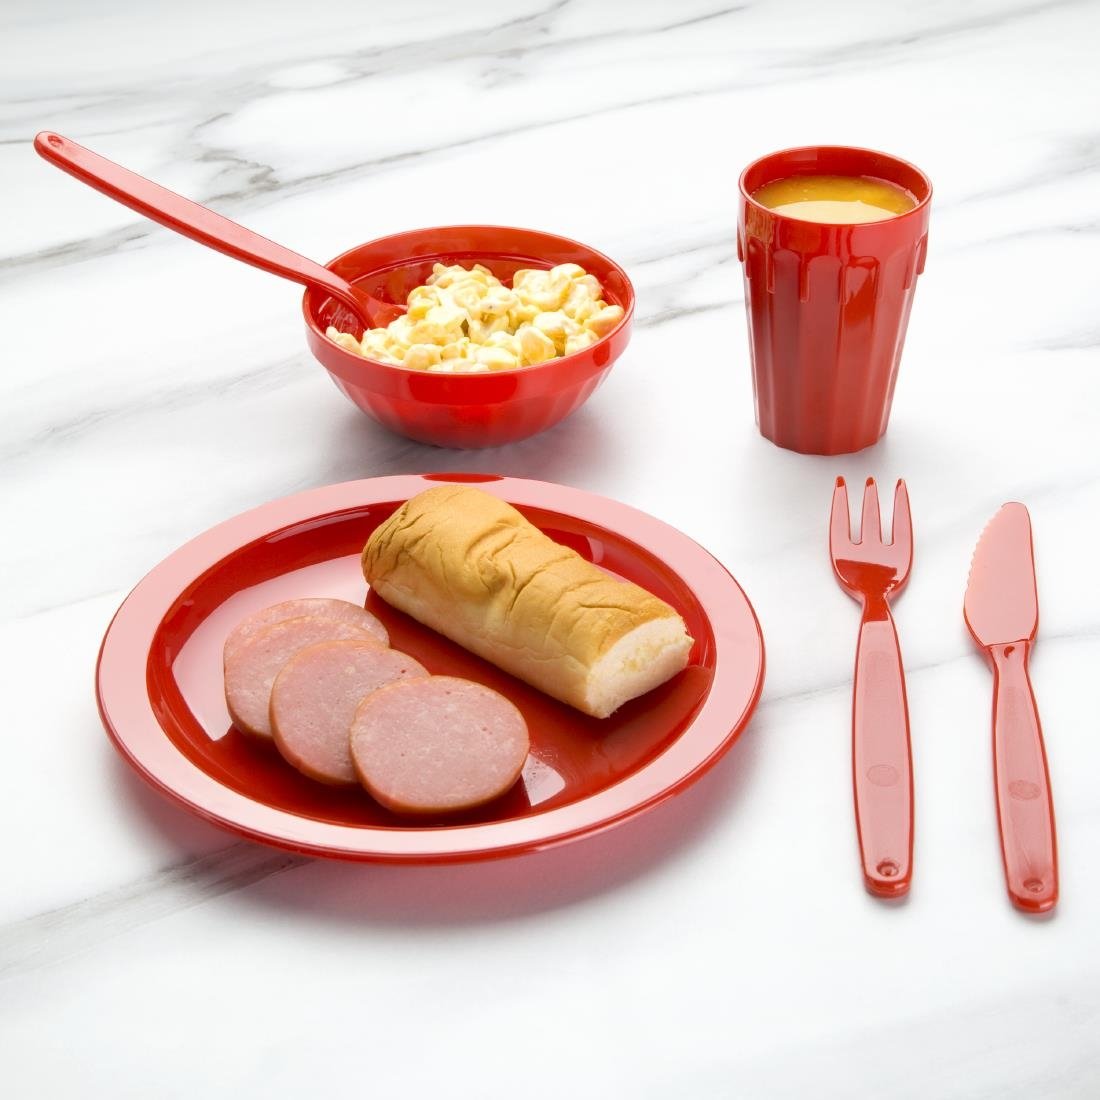 DL122 Polycarbonate Spoon Red Kristallon (Pack of 12) JD Catering Equipment Solutions Ltd